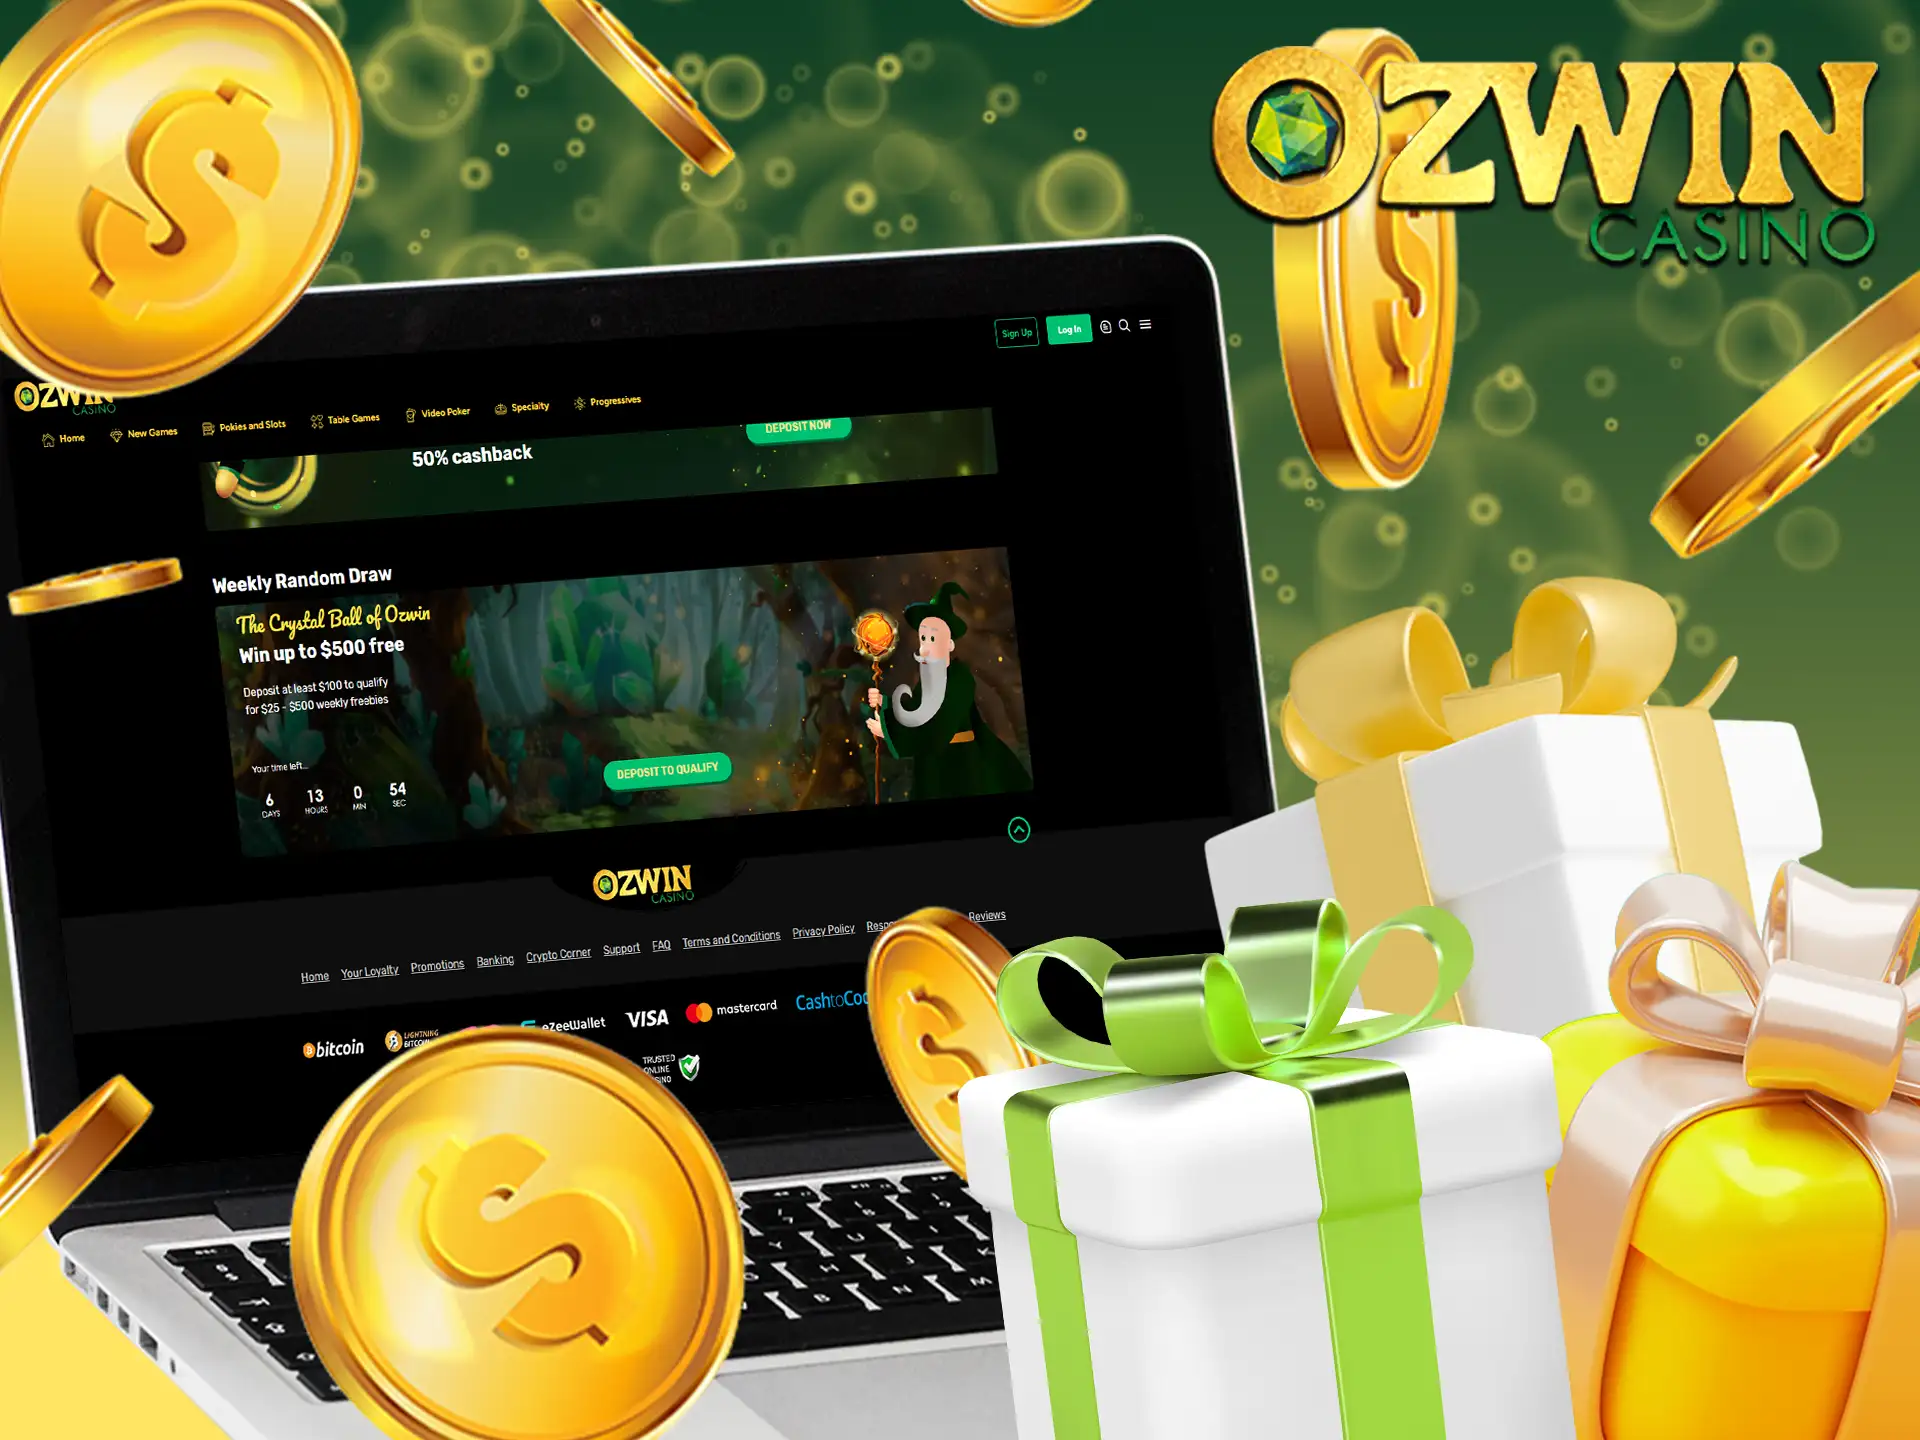 Don't miss out on Ozwin Casino's special deals available every weekend!